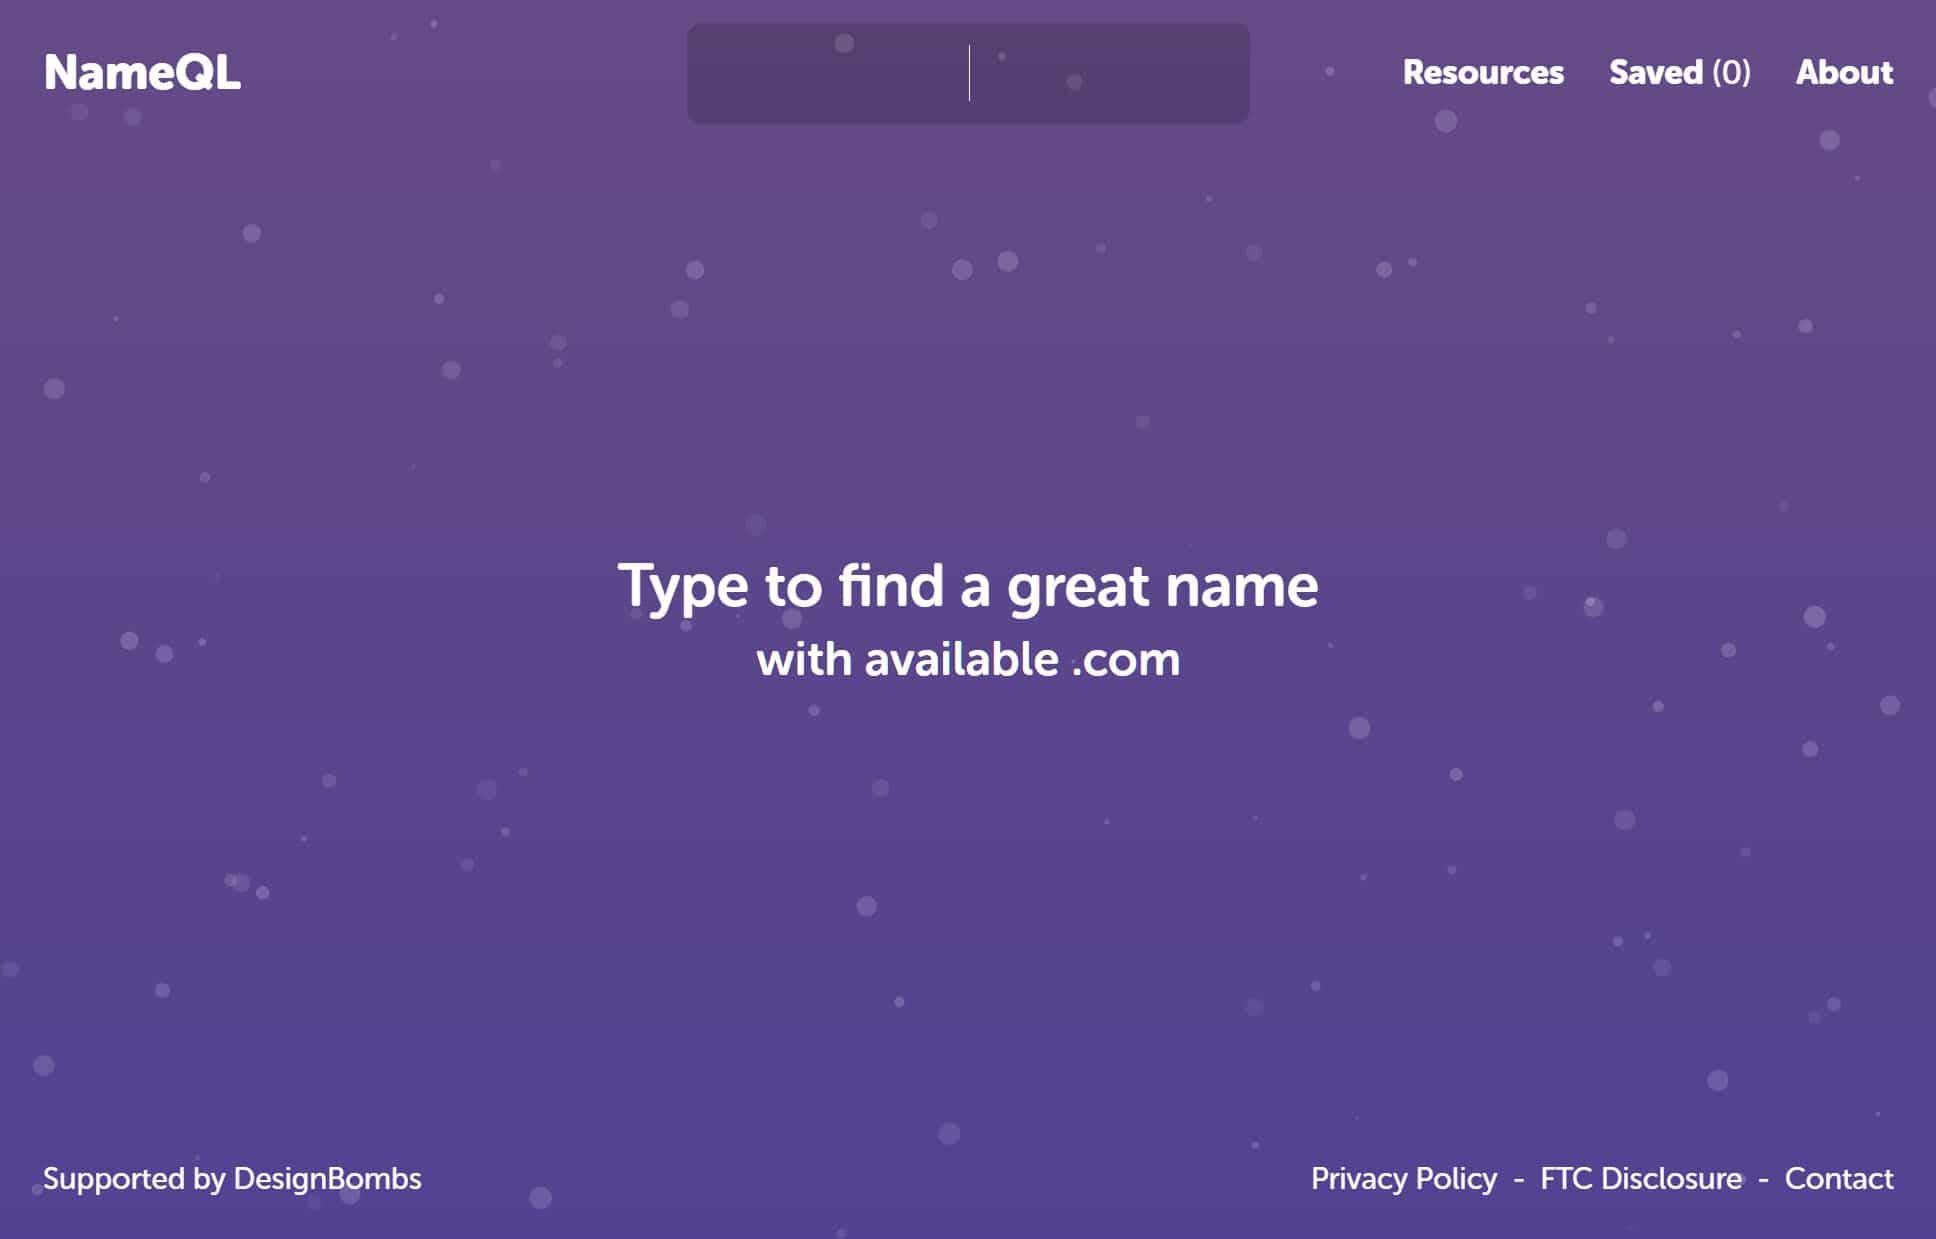 The NameQL homepage, showing the words "Type to find a great name" in the center and a search input field at the top.